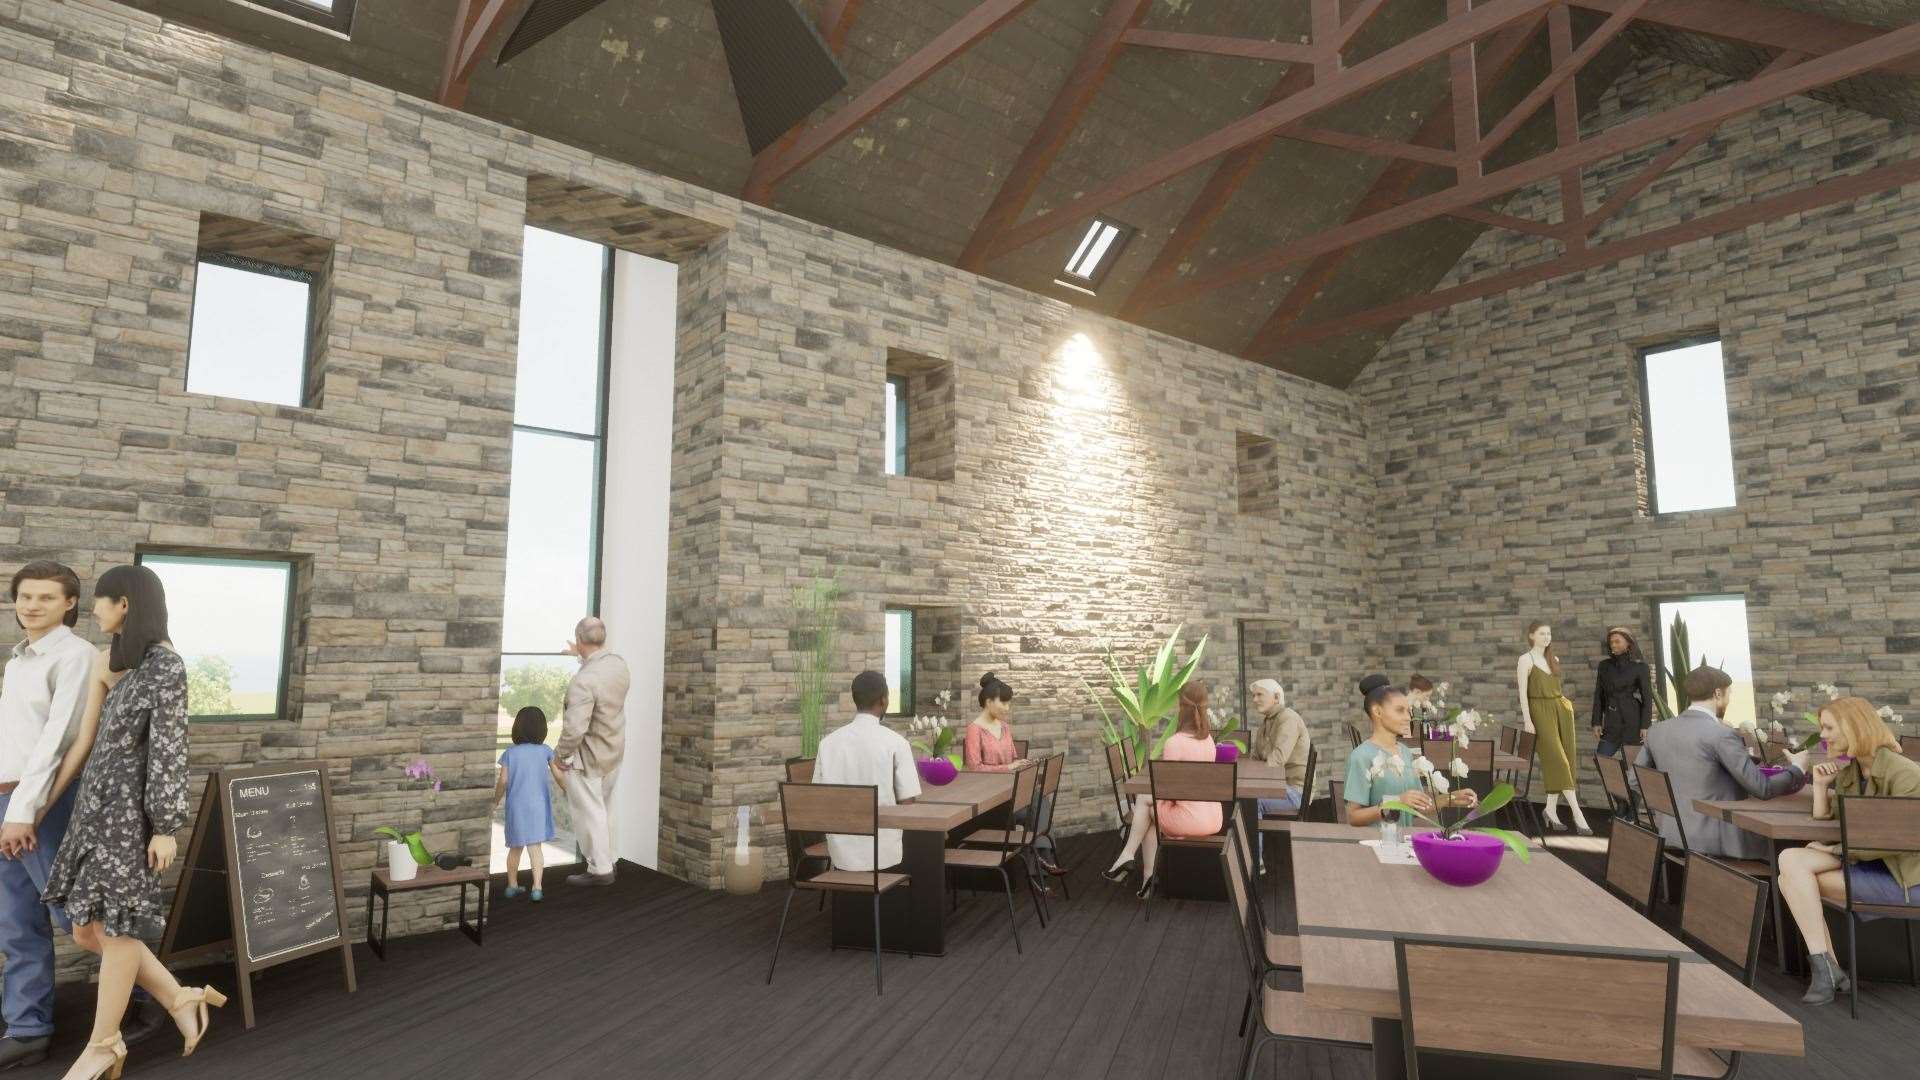 A café and visitor centre is to be included in the refurbishment of the historic mill.